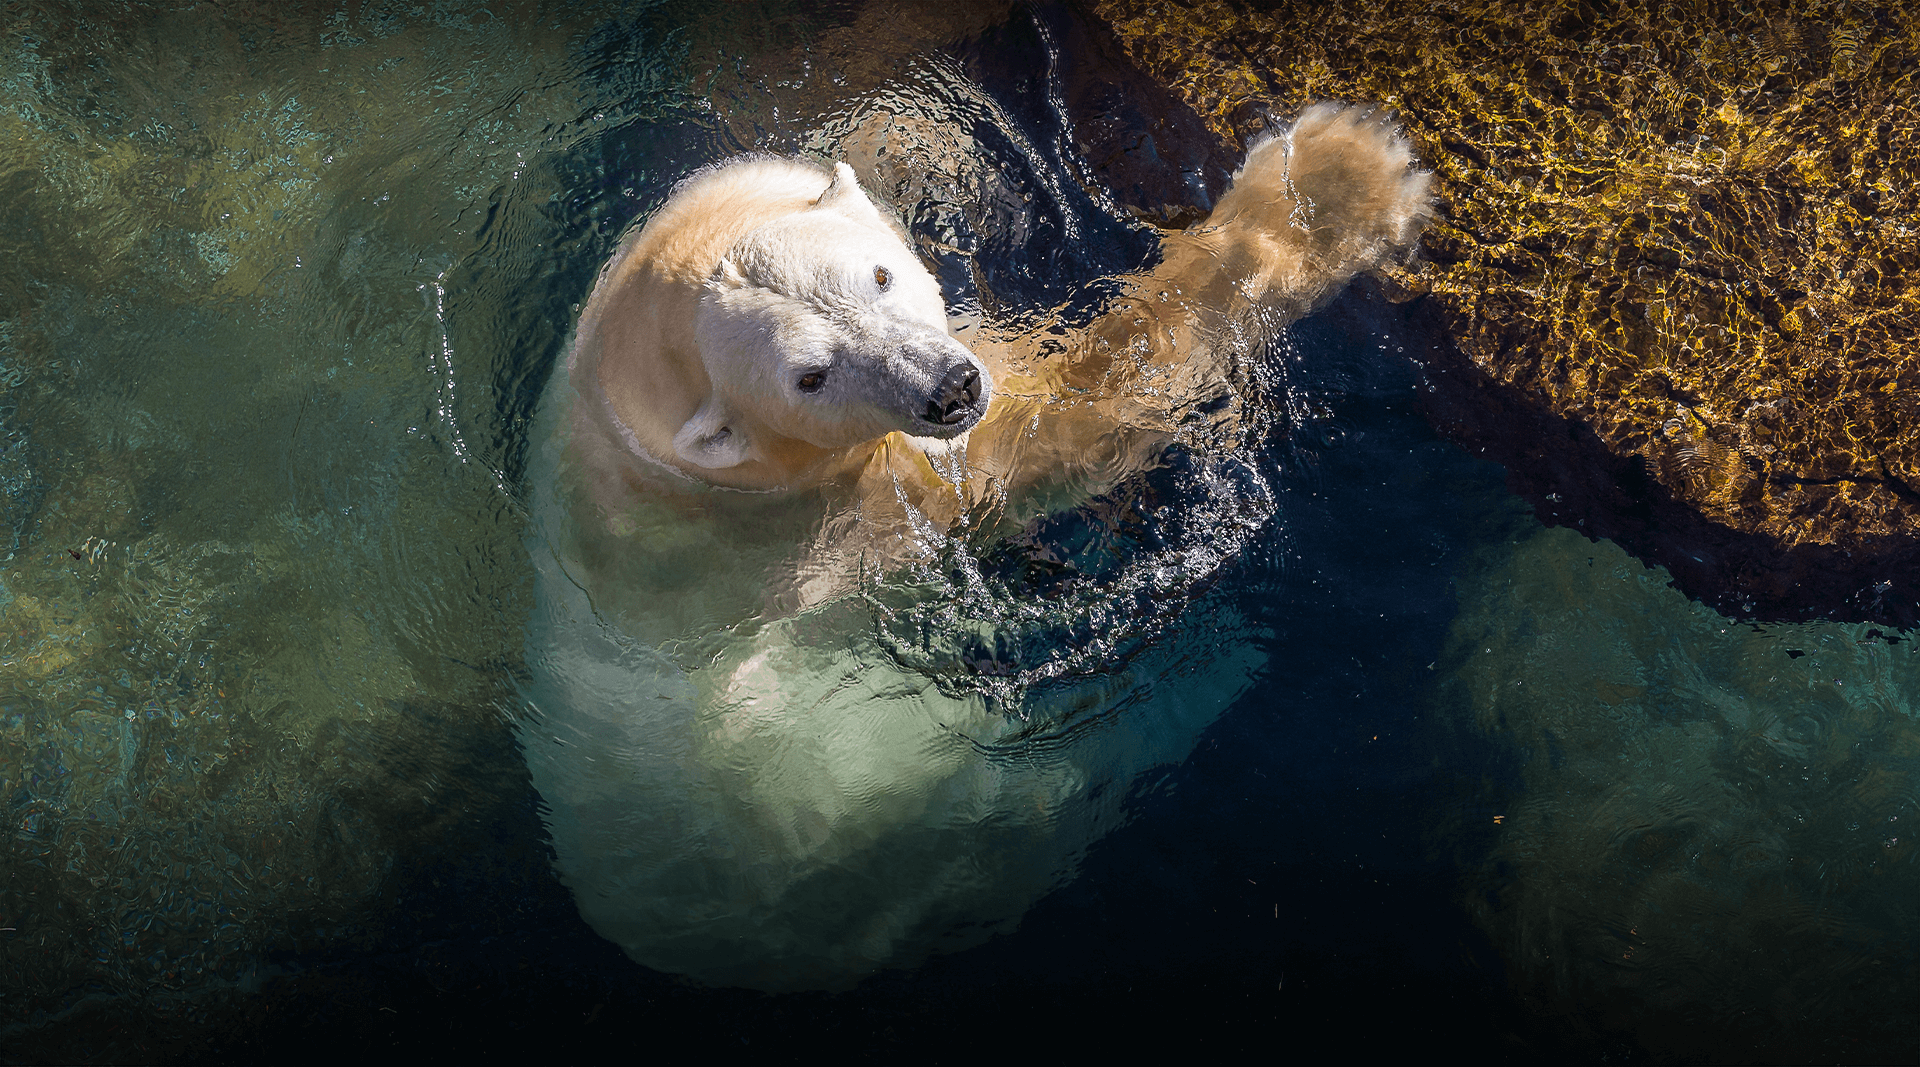 Polar bear in the pool looking up a the camera